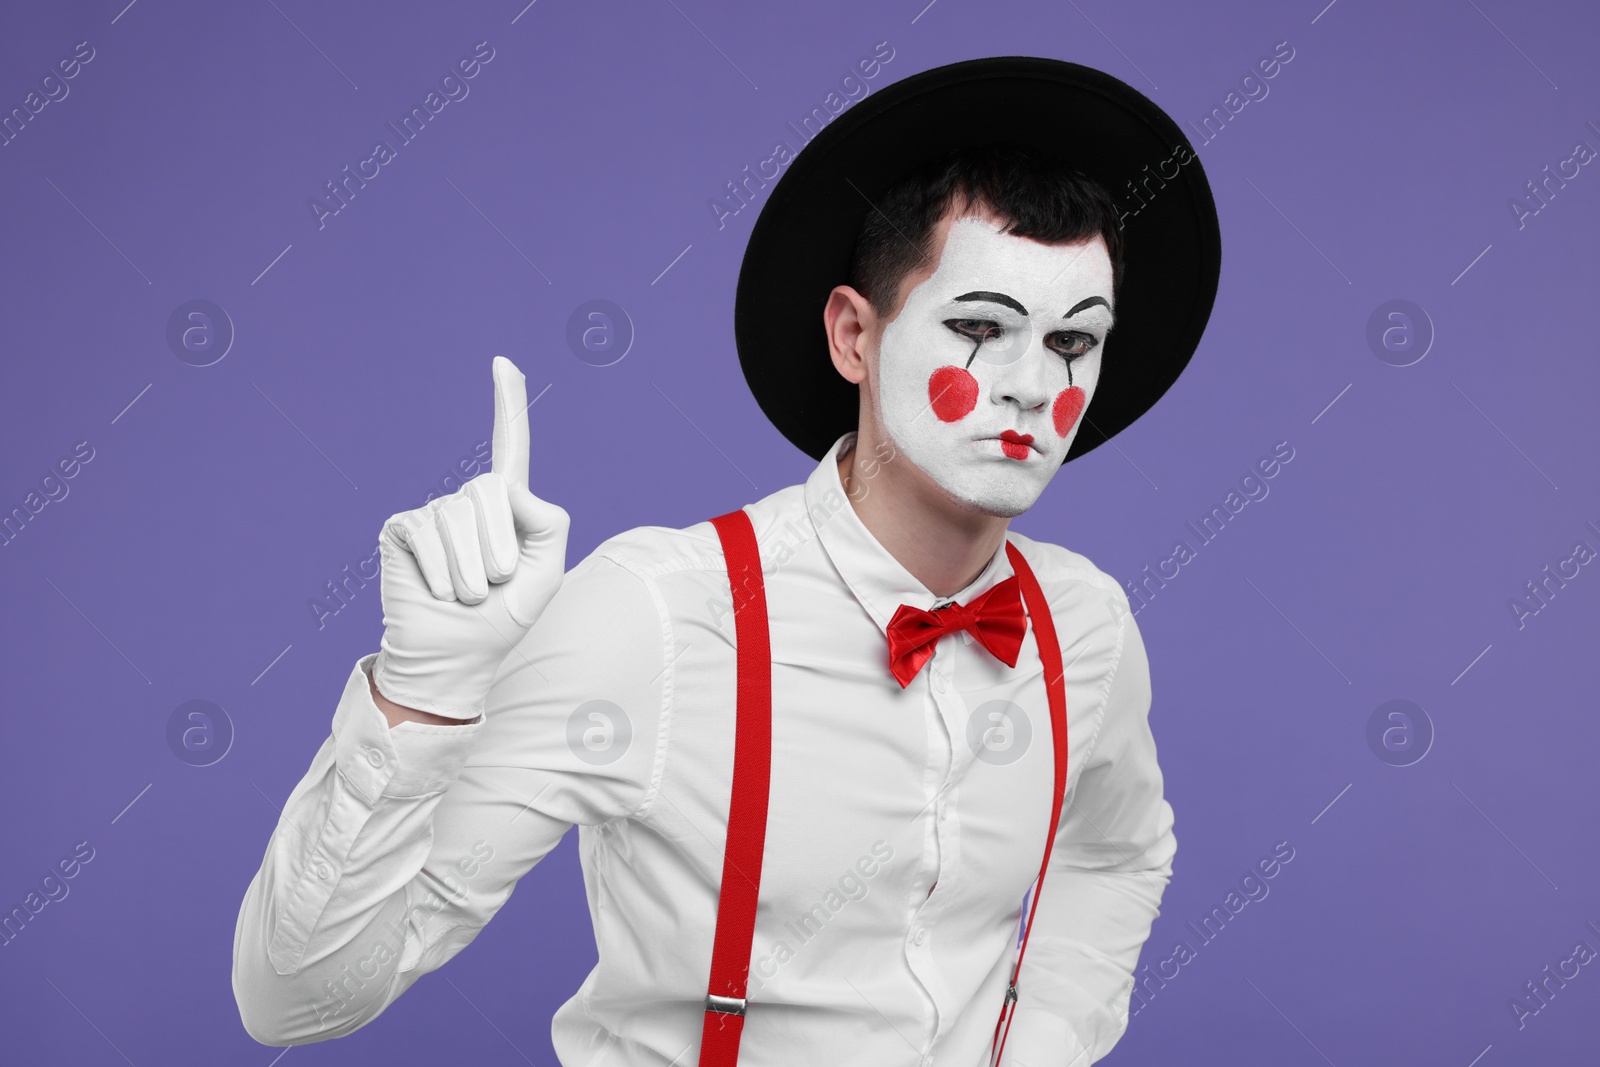 Photo of Funny mime artist gesturing on purple background